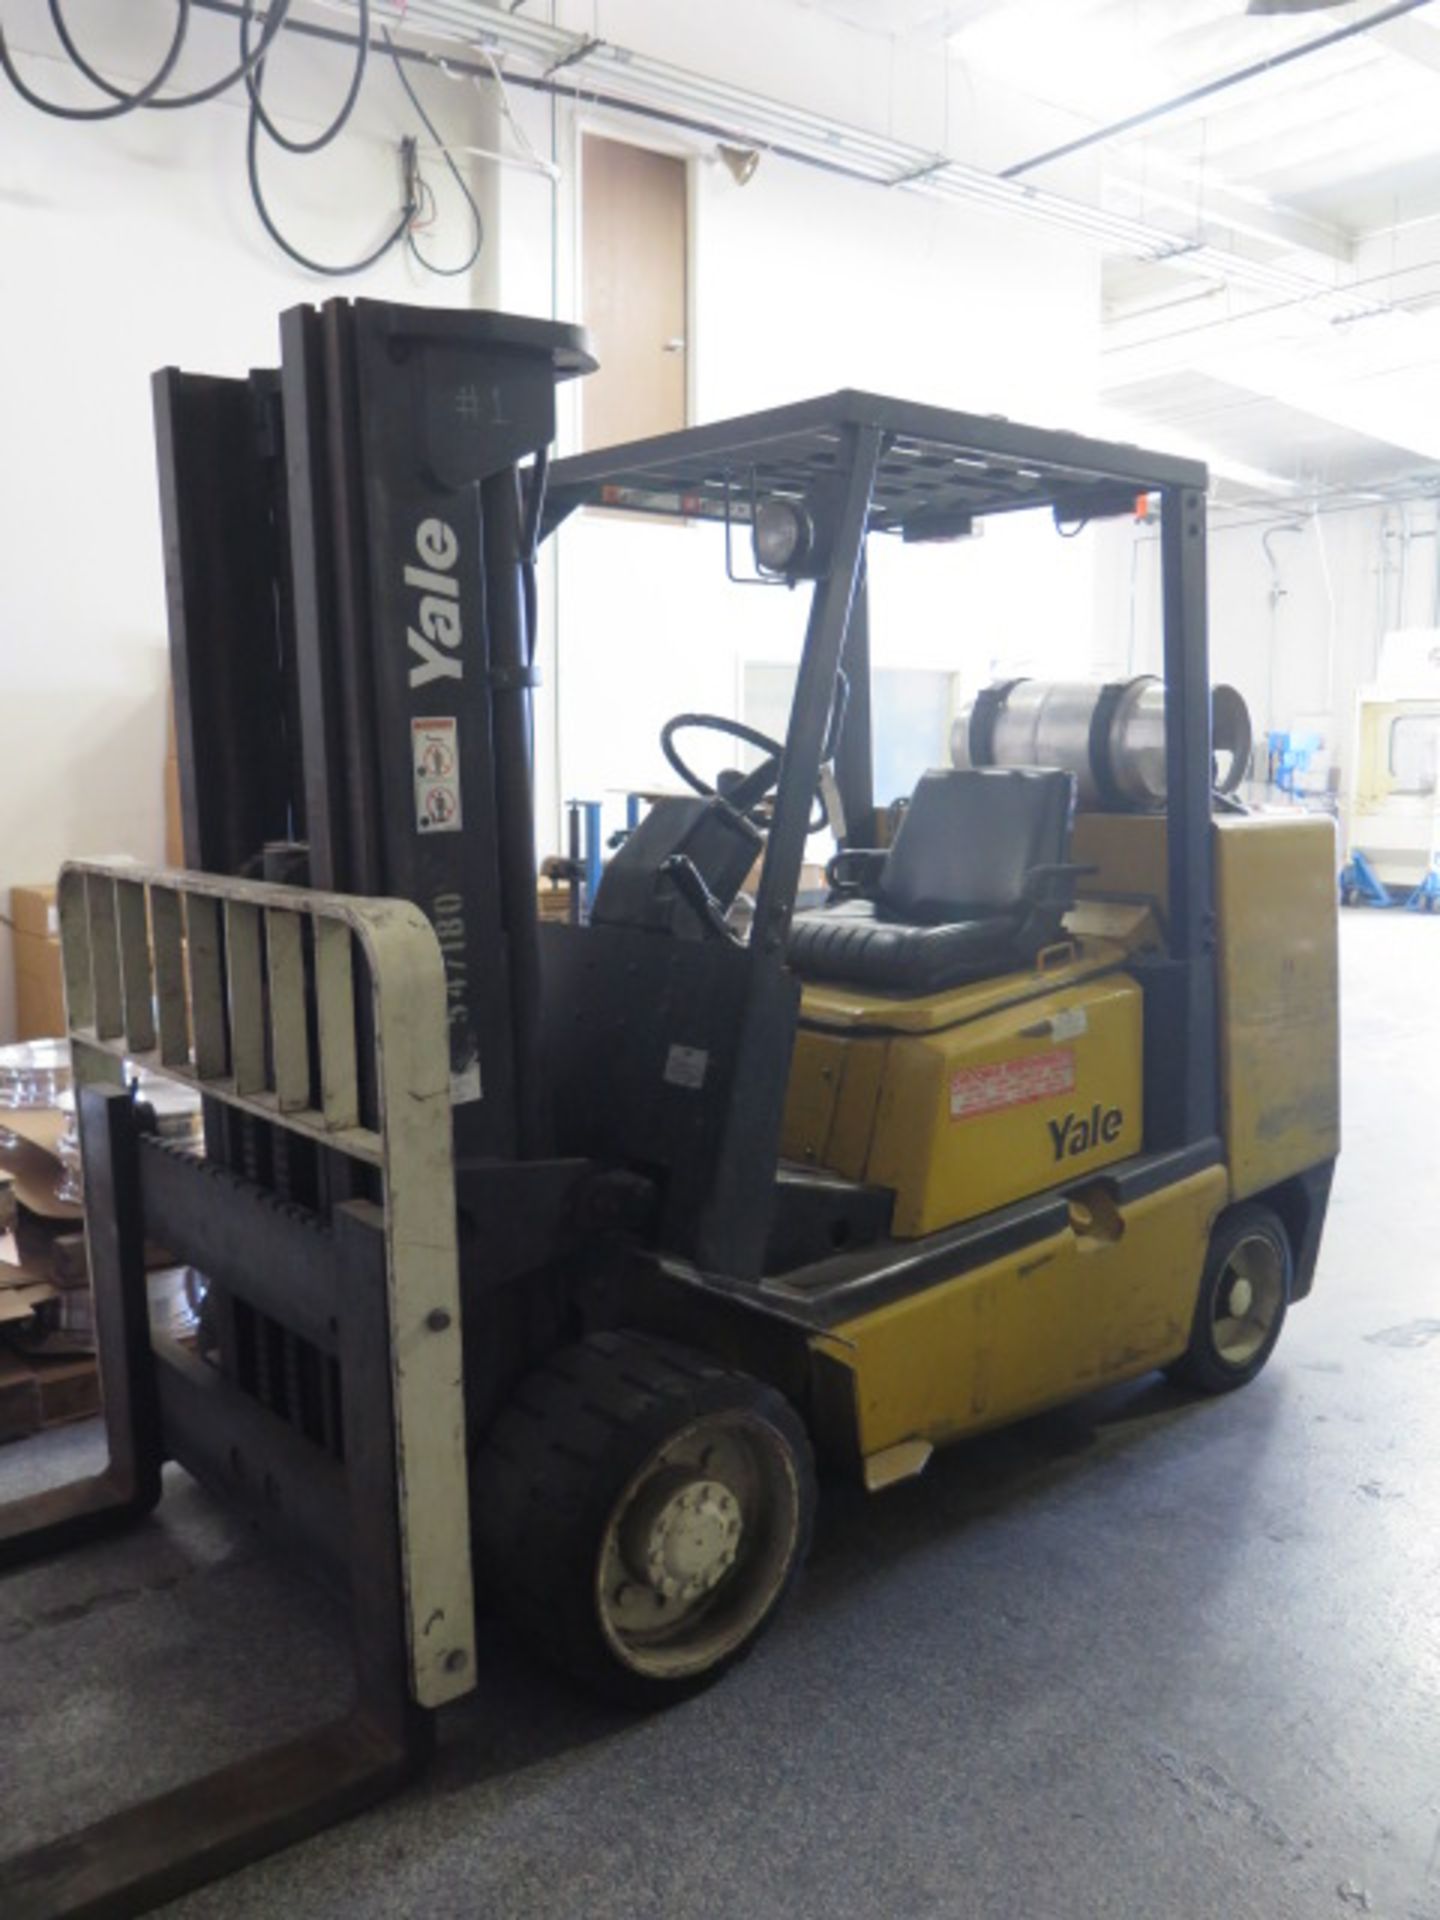 Yale GLC120MFNSAE085 12,000 Lb Cap LPG Forklift s/n N547180 w/ 3-Stage Mast, 170” Lift Height, Solid - Image 2 of 14